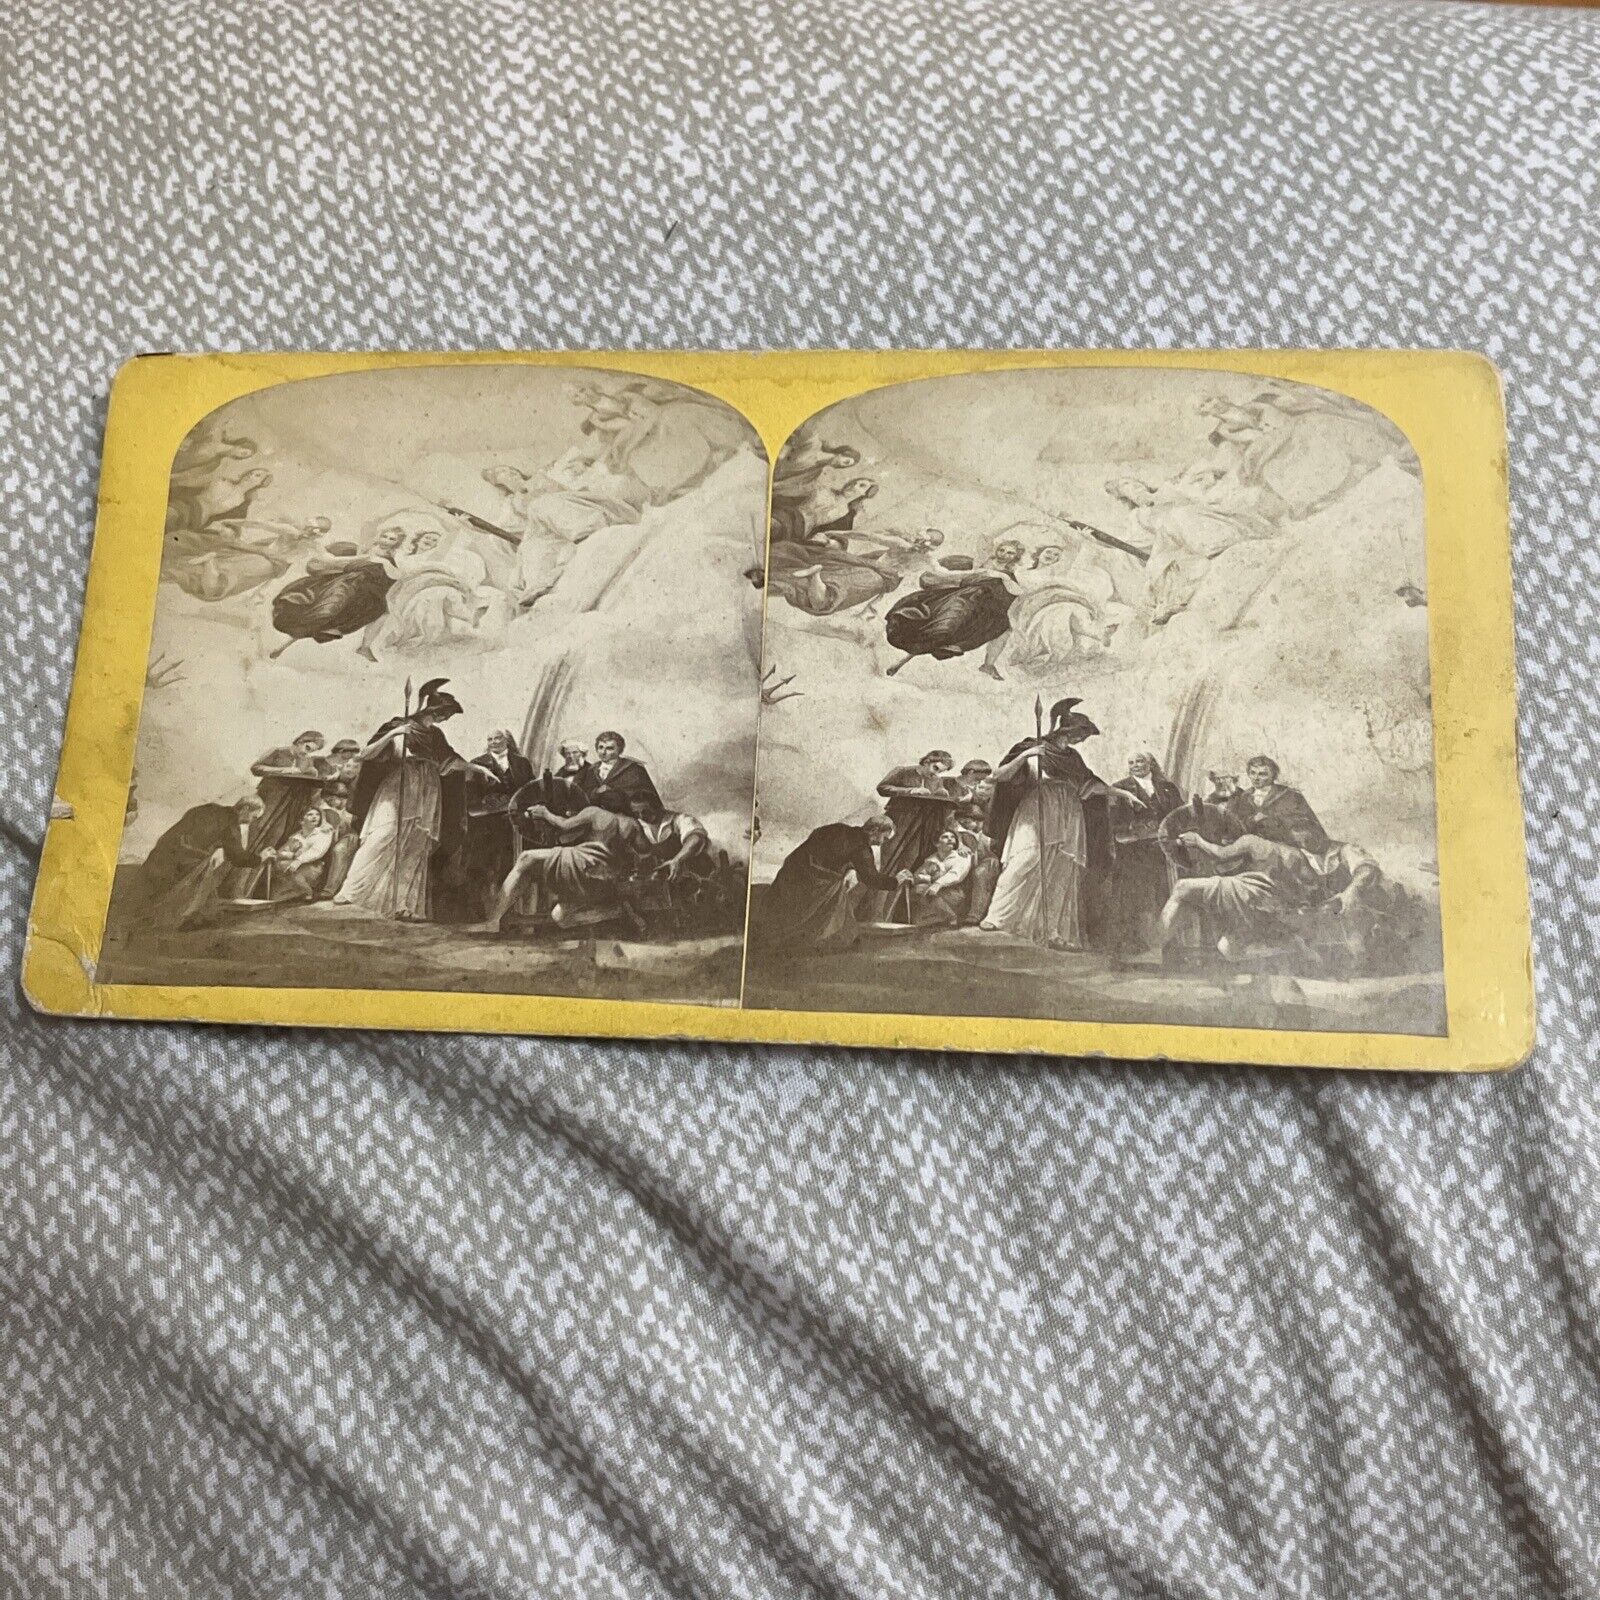 Antique Stereoscope Card Photo: Painting in Dome of Capitol - Washington DC Art